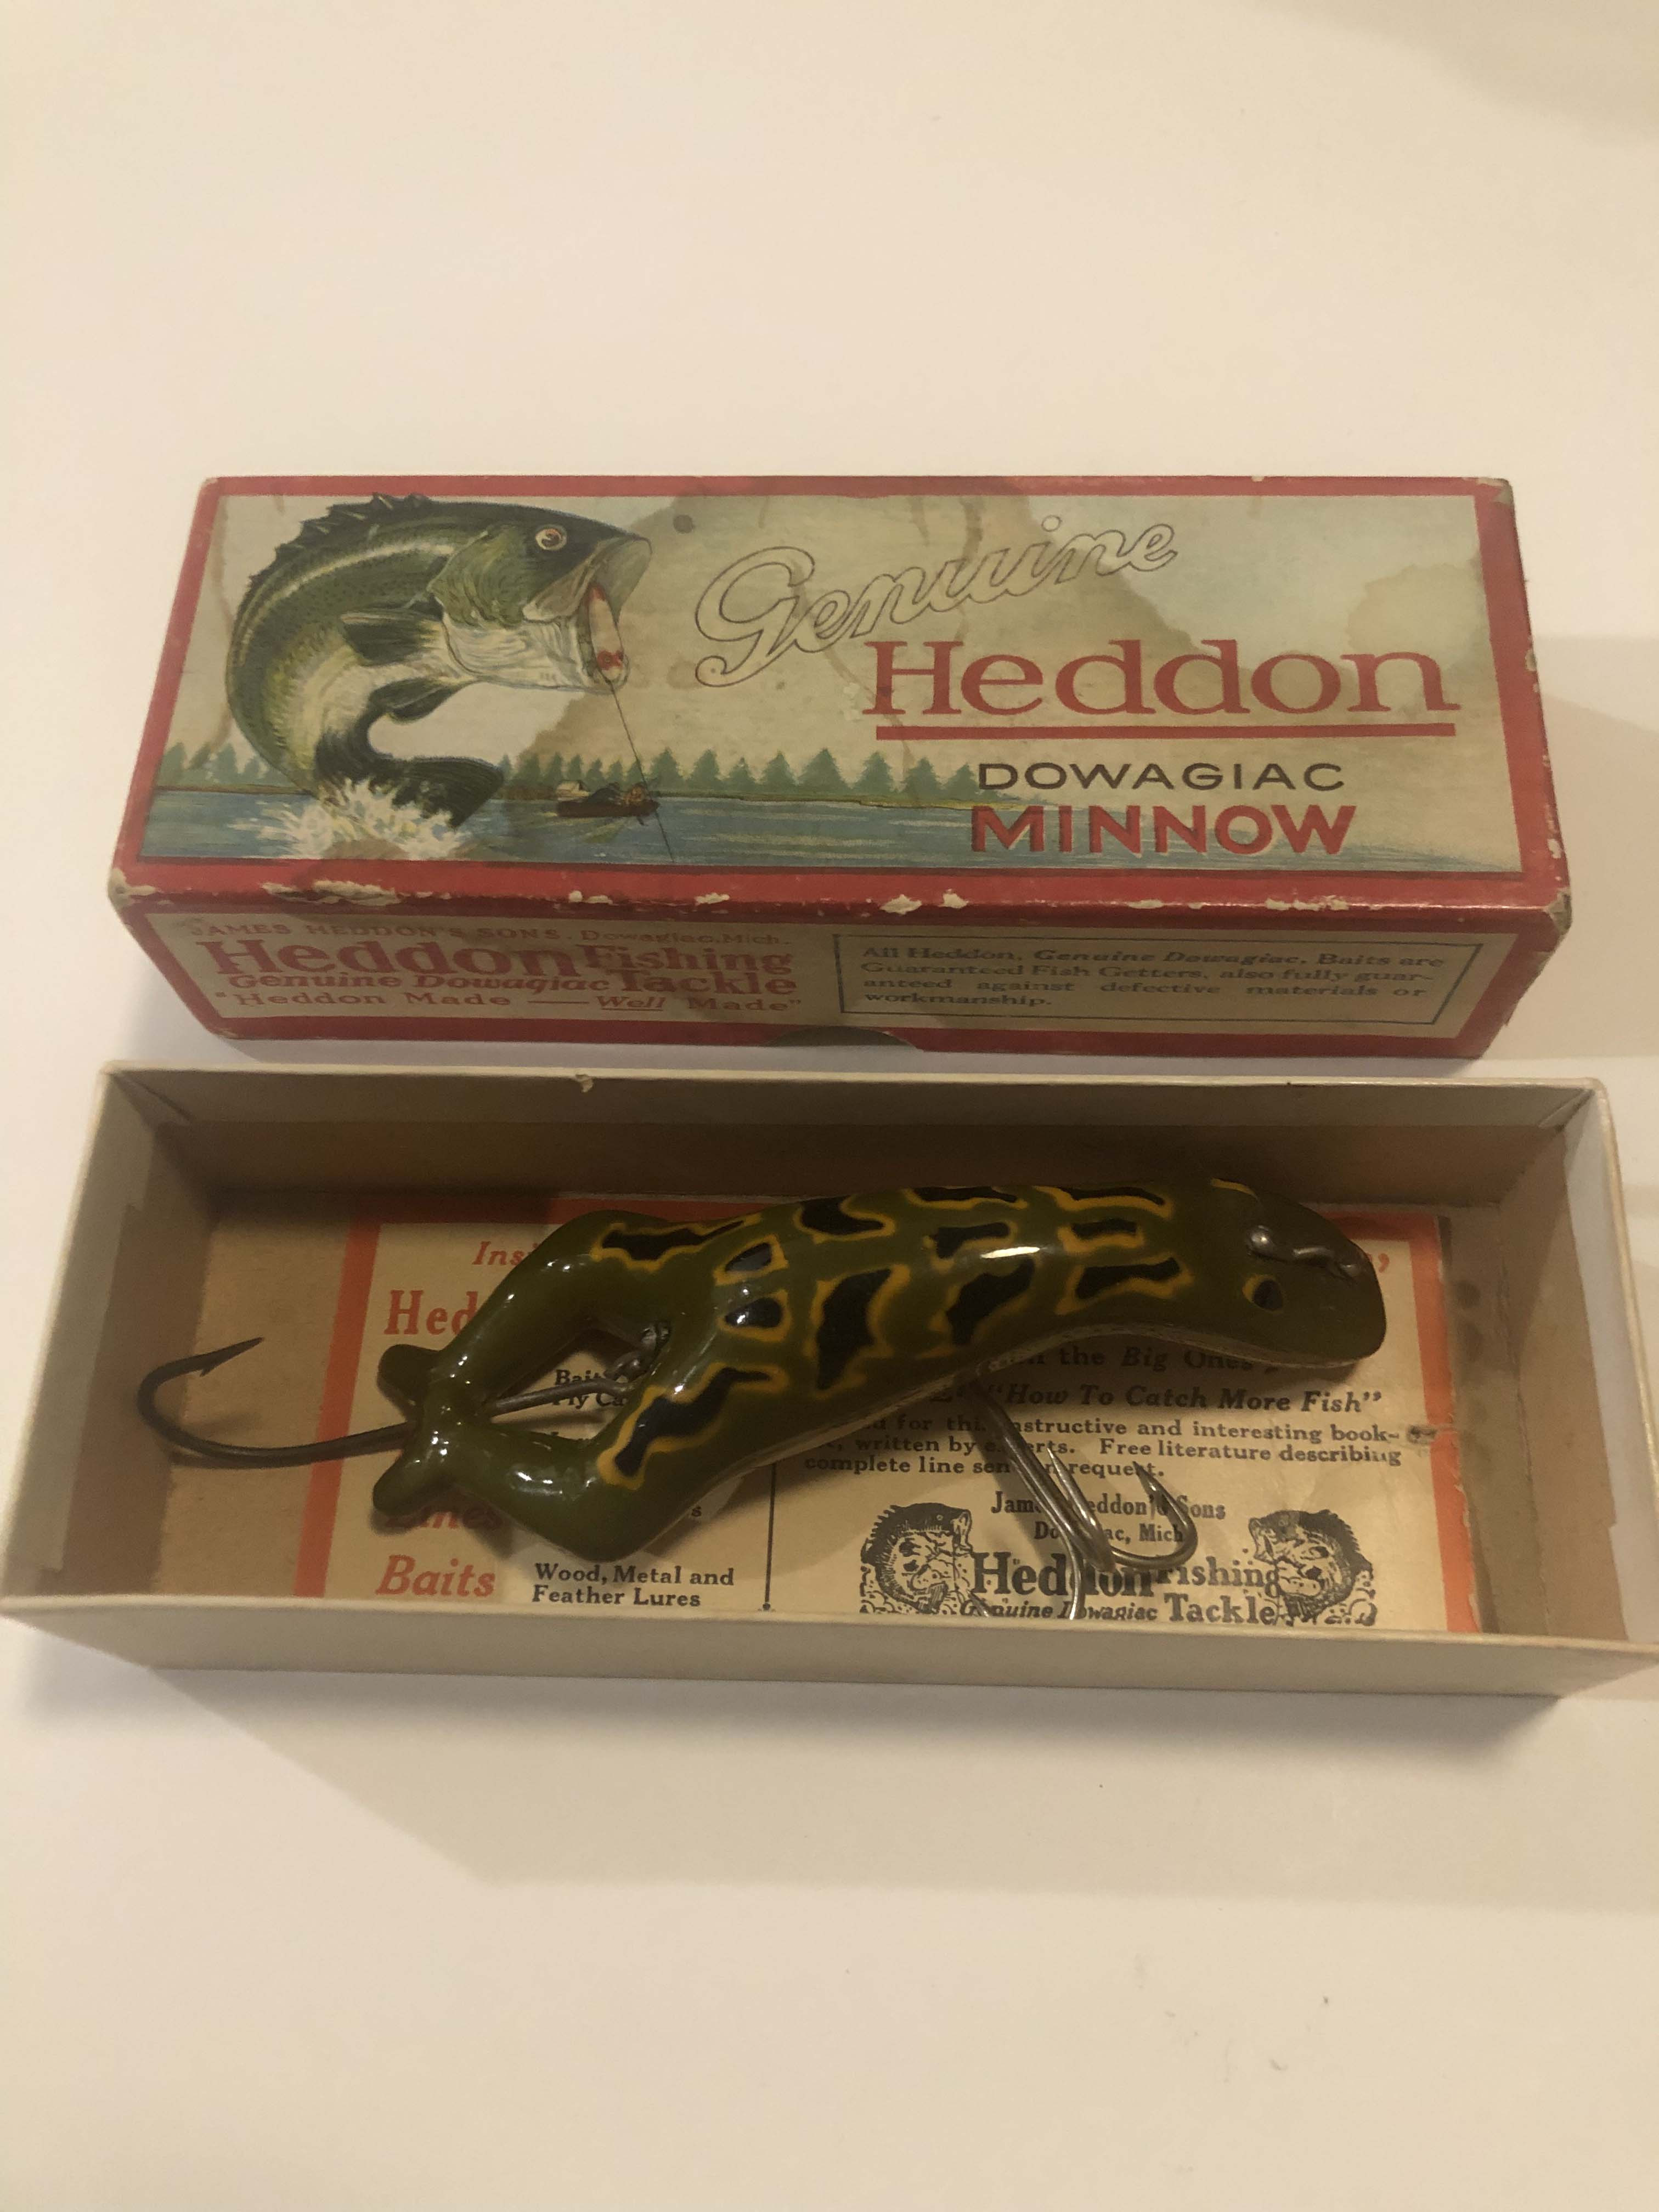 Great Heddon Luny Frog Lure/Box Combination | The Angling Marketplace